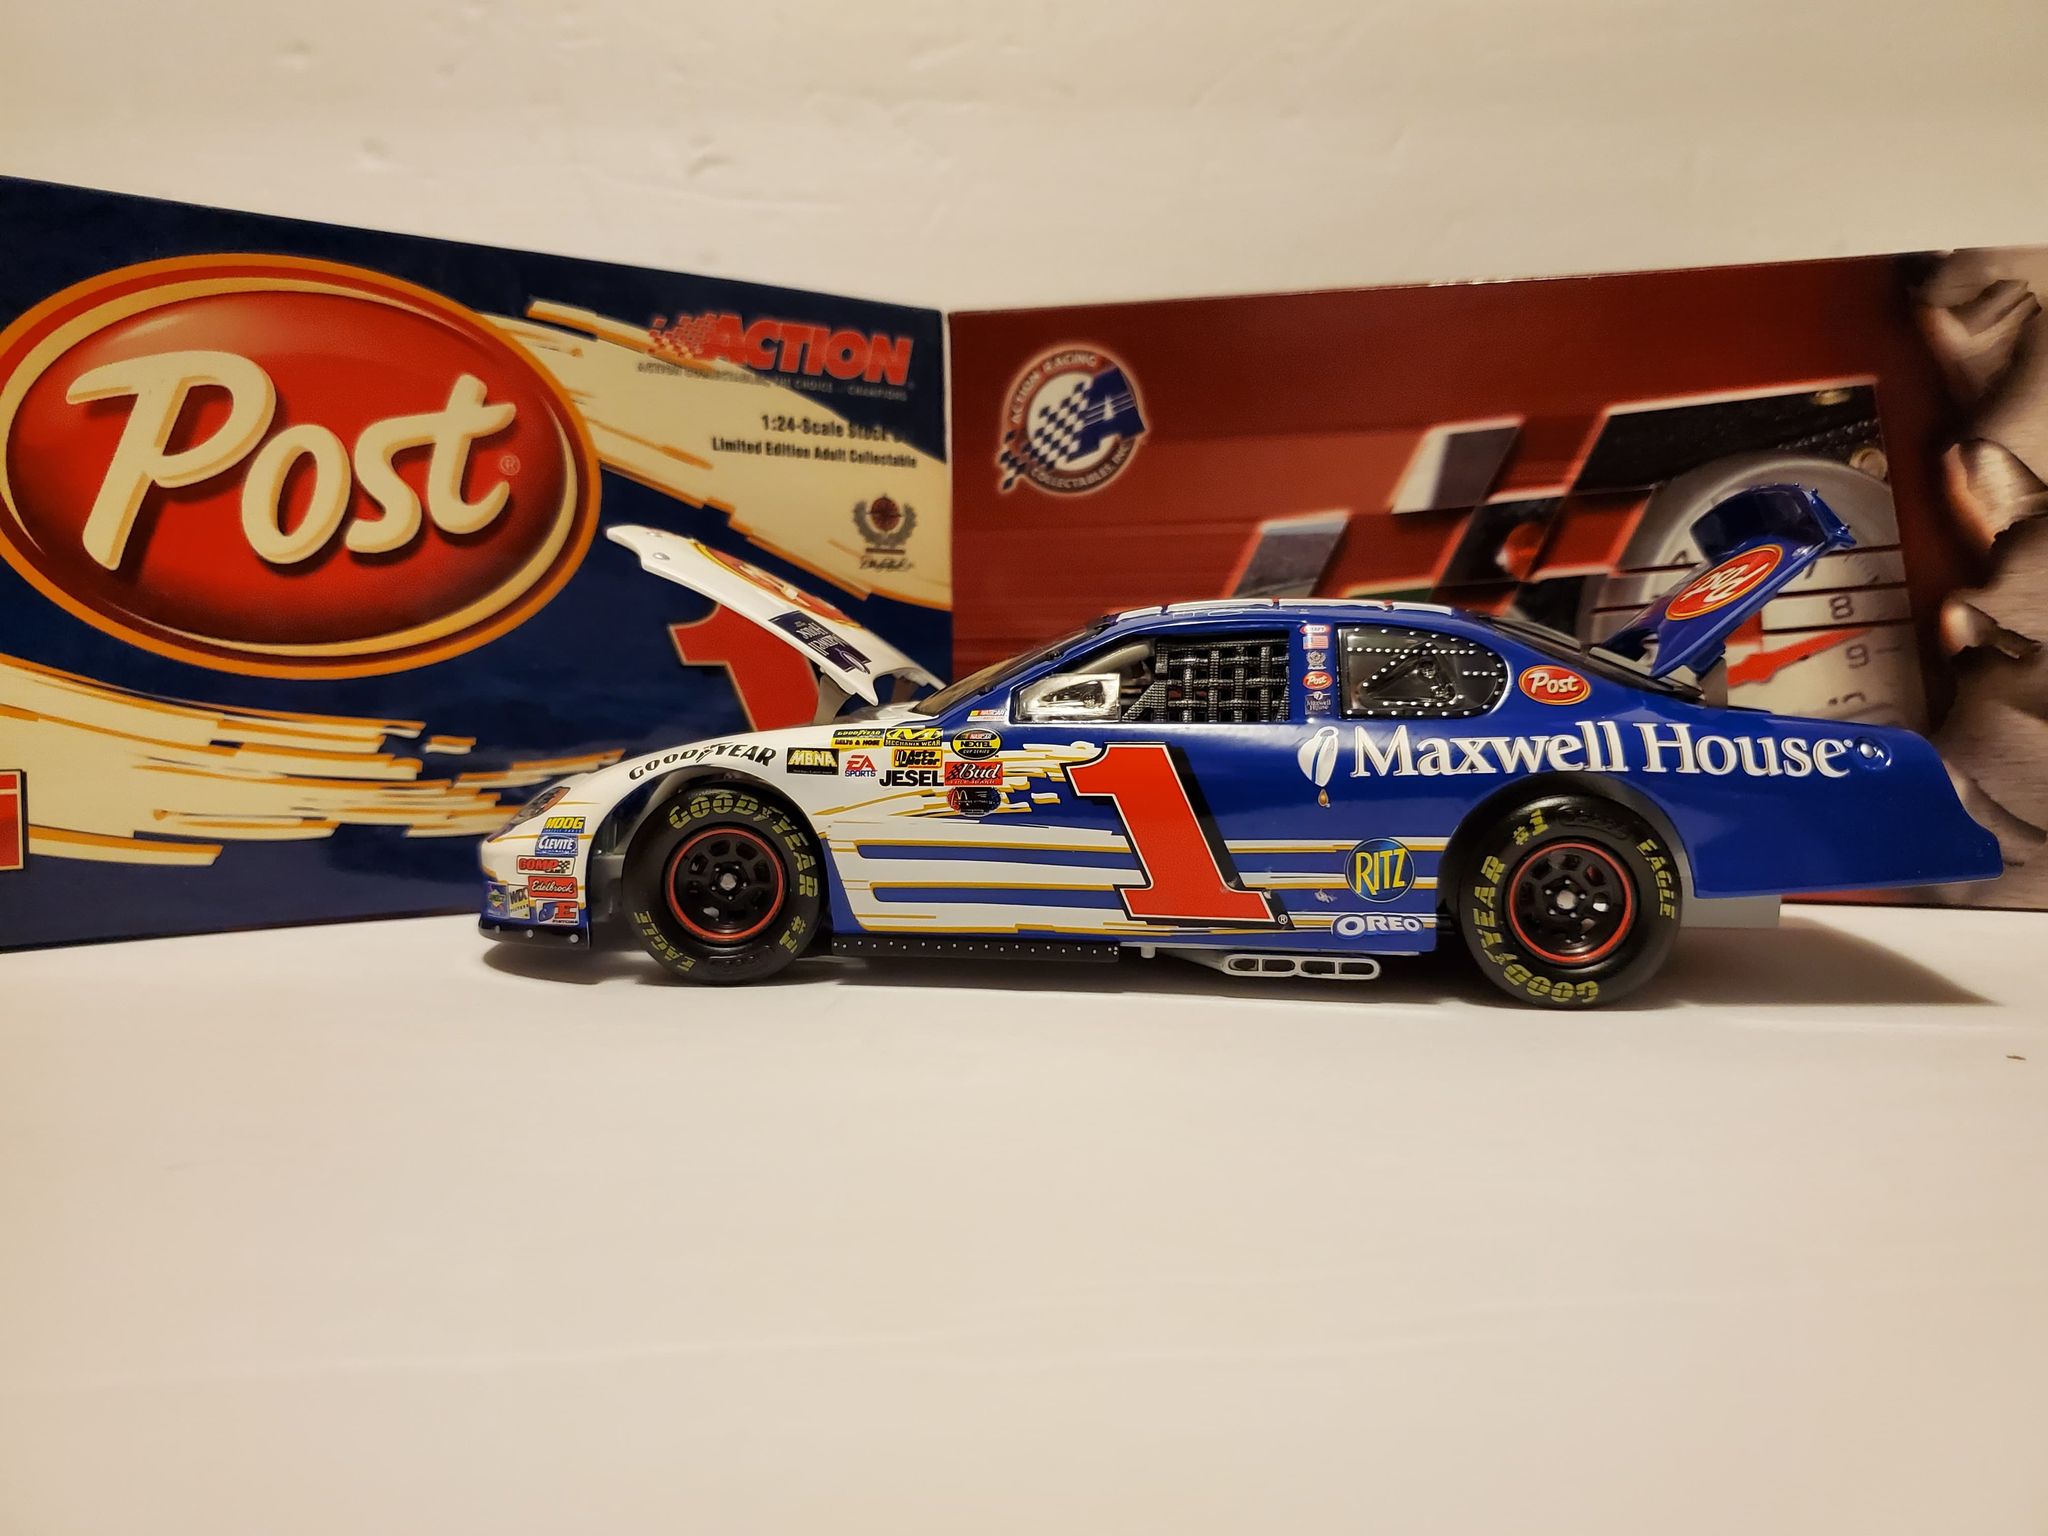 2004 ACTION #1 POST - MAXWELL HOUSE - JOHN ANDRETTI - 1/24 Diecast  - Second hand -SH001